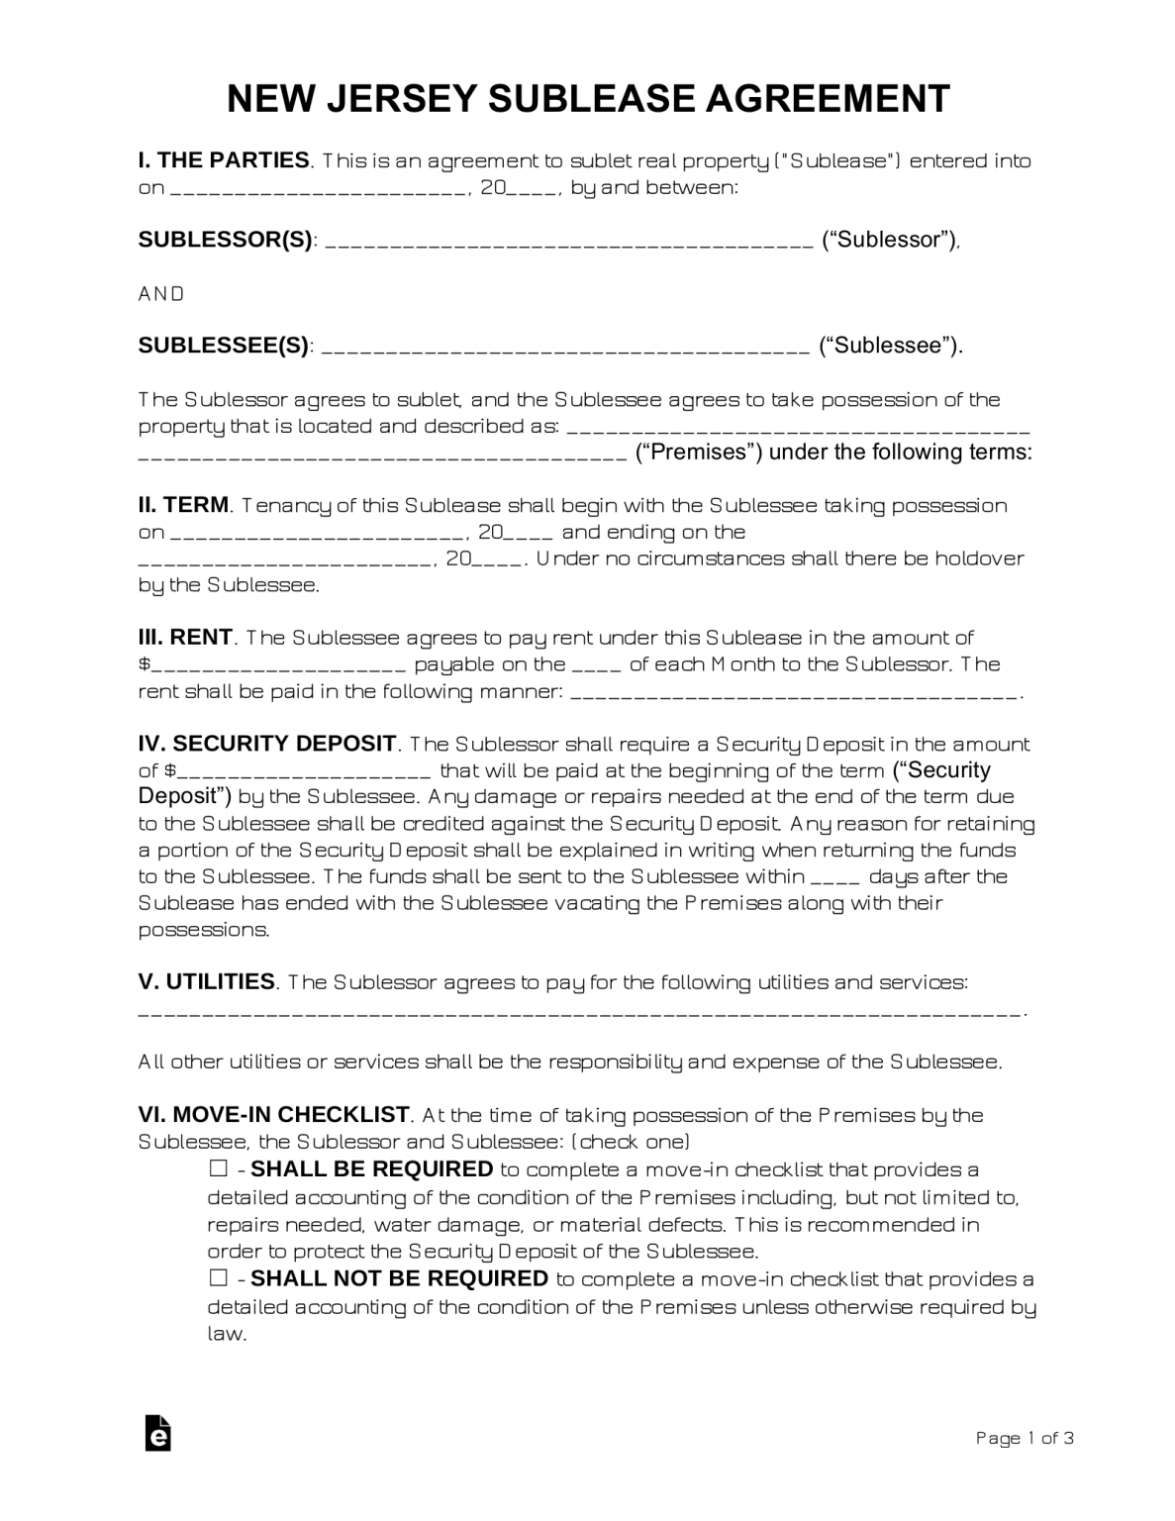 Free New Jersey Sublease Agreement Template - Pdf | Word - Eforms Within New Jersey Residential Lease Agreement Template